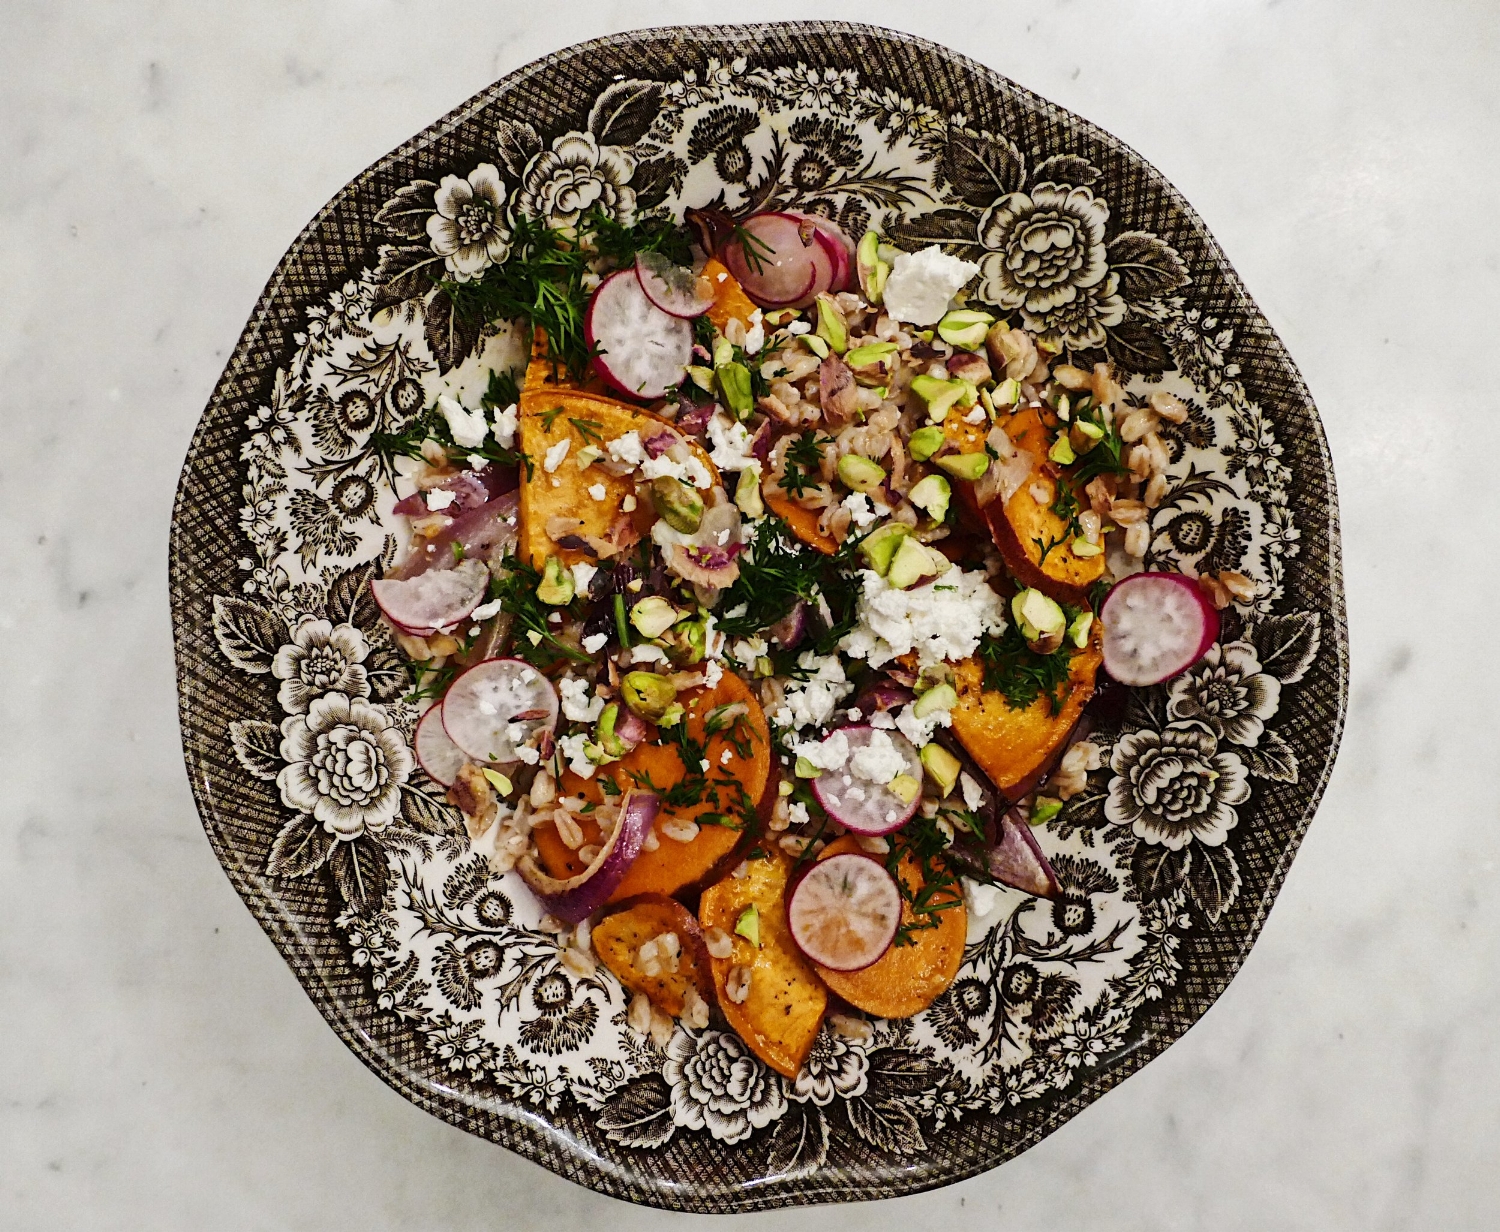 Farro Salad with Roasted Sweet Potato, Red Onion and Goat Cheese